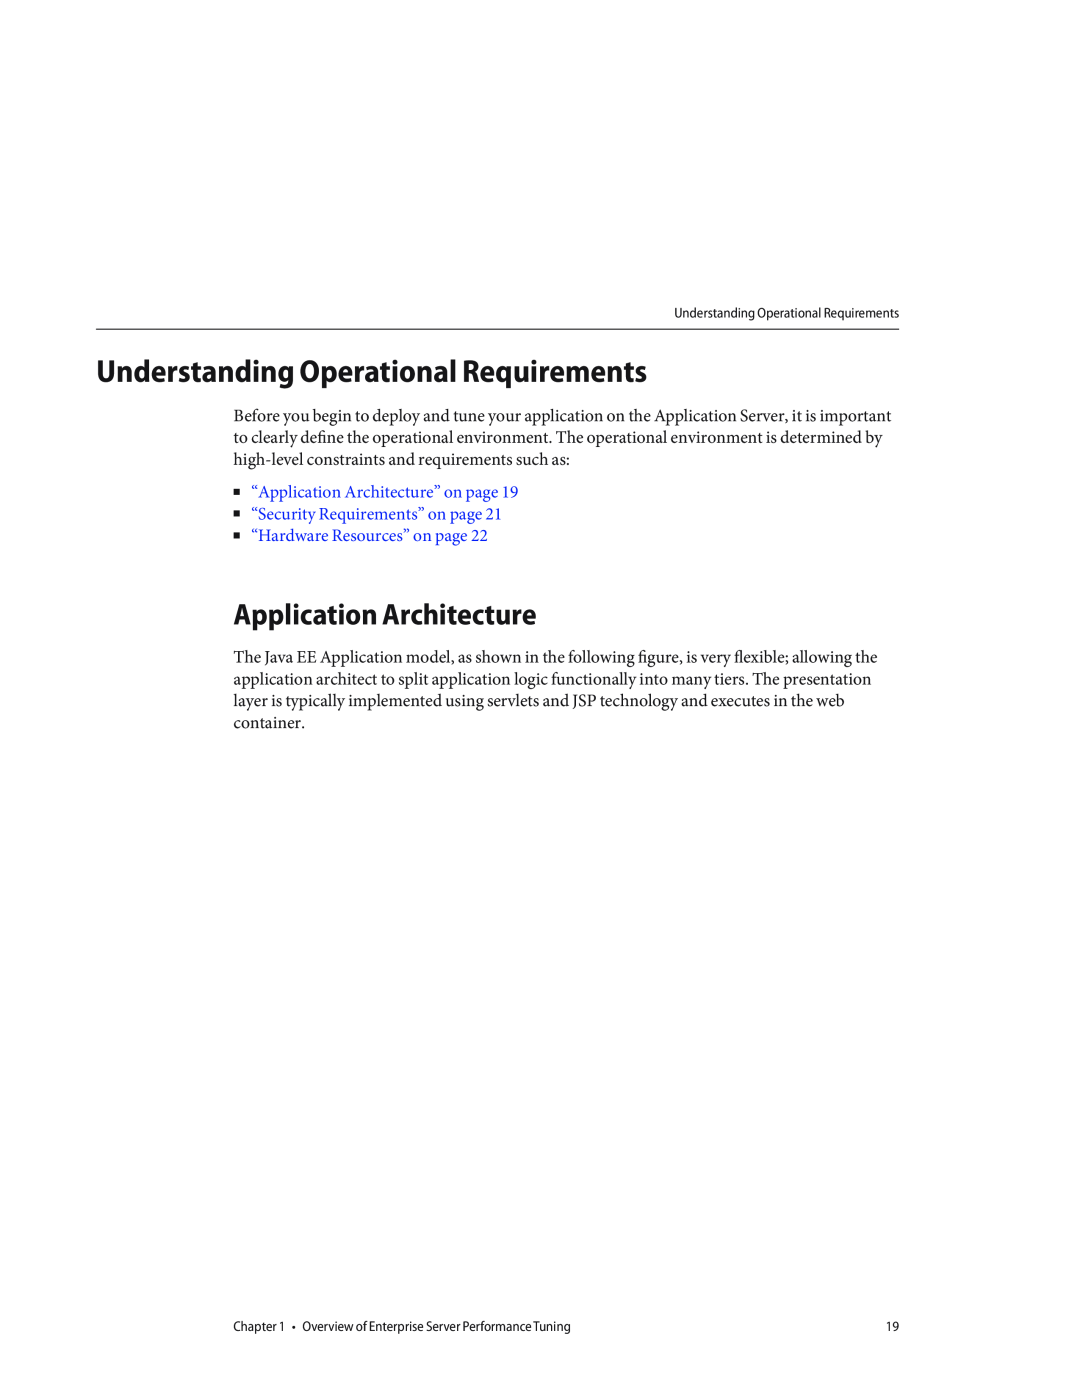 Sun Microsystems 820434310 Understanding Operational Requirements, Application Architecture, “Hardware Resources” on page 